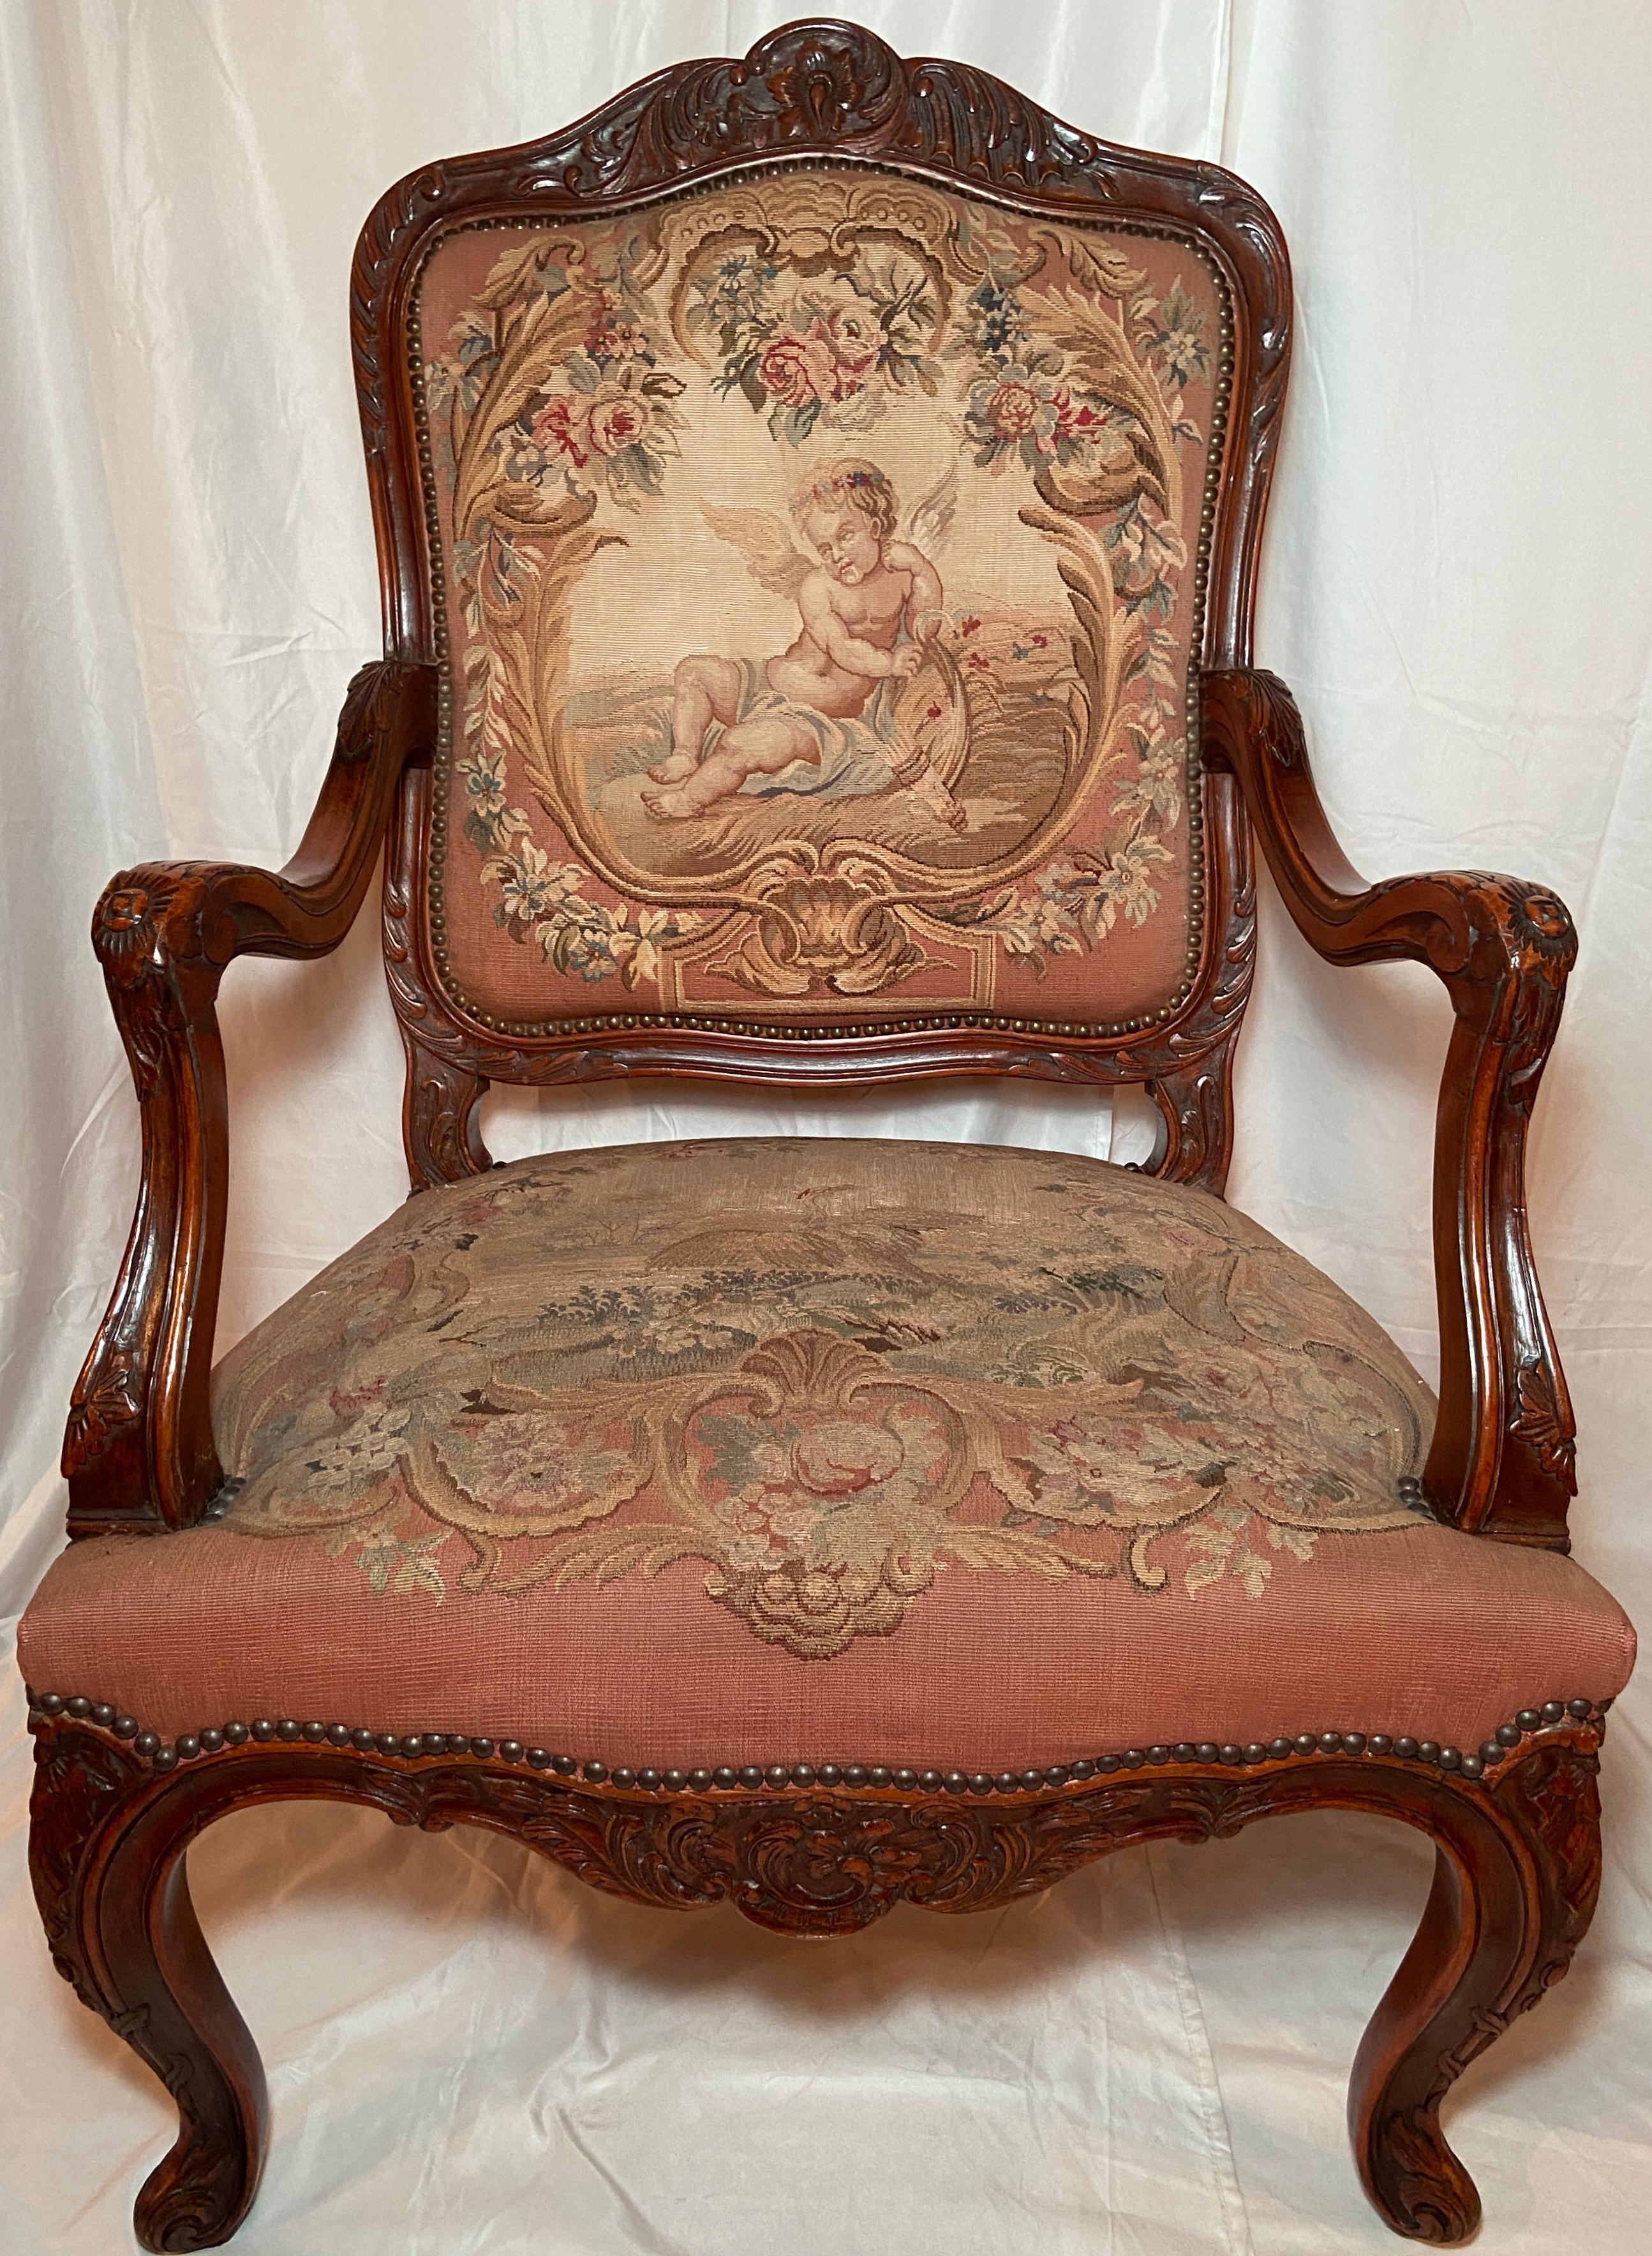 Pair Antique French Walnut Needlepoint Armchairs, Circa 1860-1870 In Good Condition For Sale In New Orleans, LA